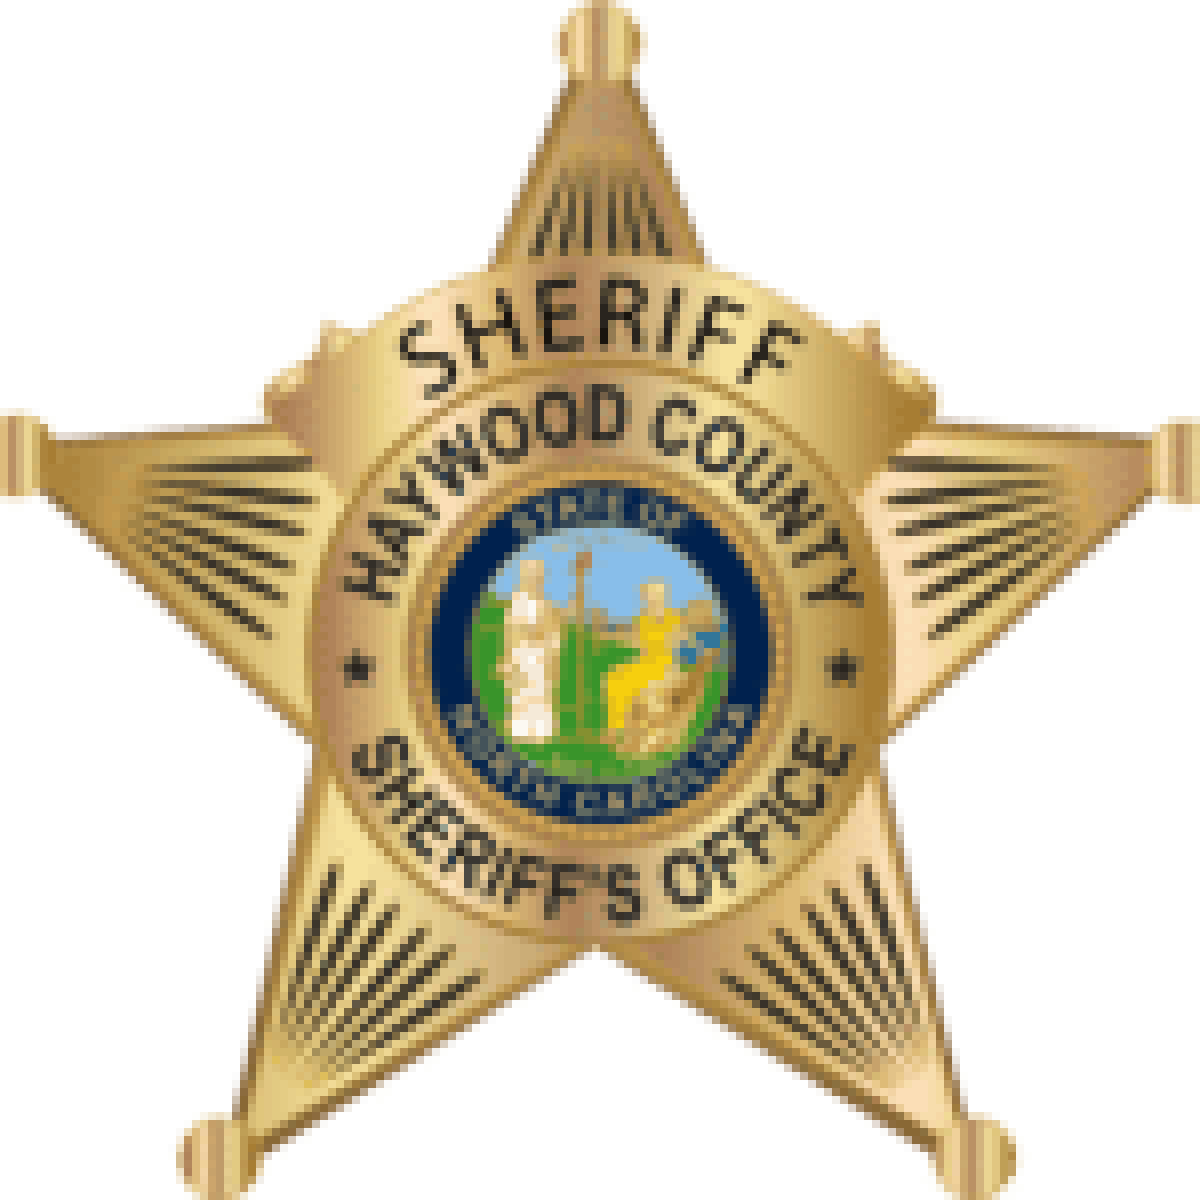 Woman arrested after allegedly abducting her children in Haywood